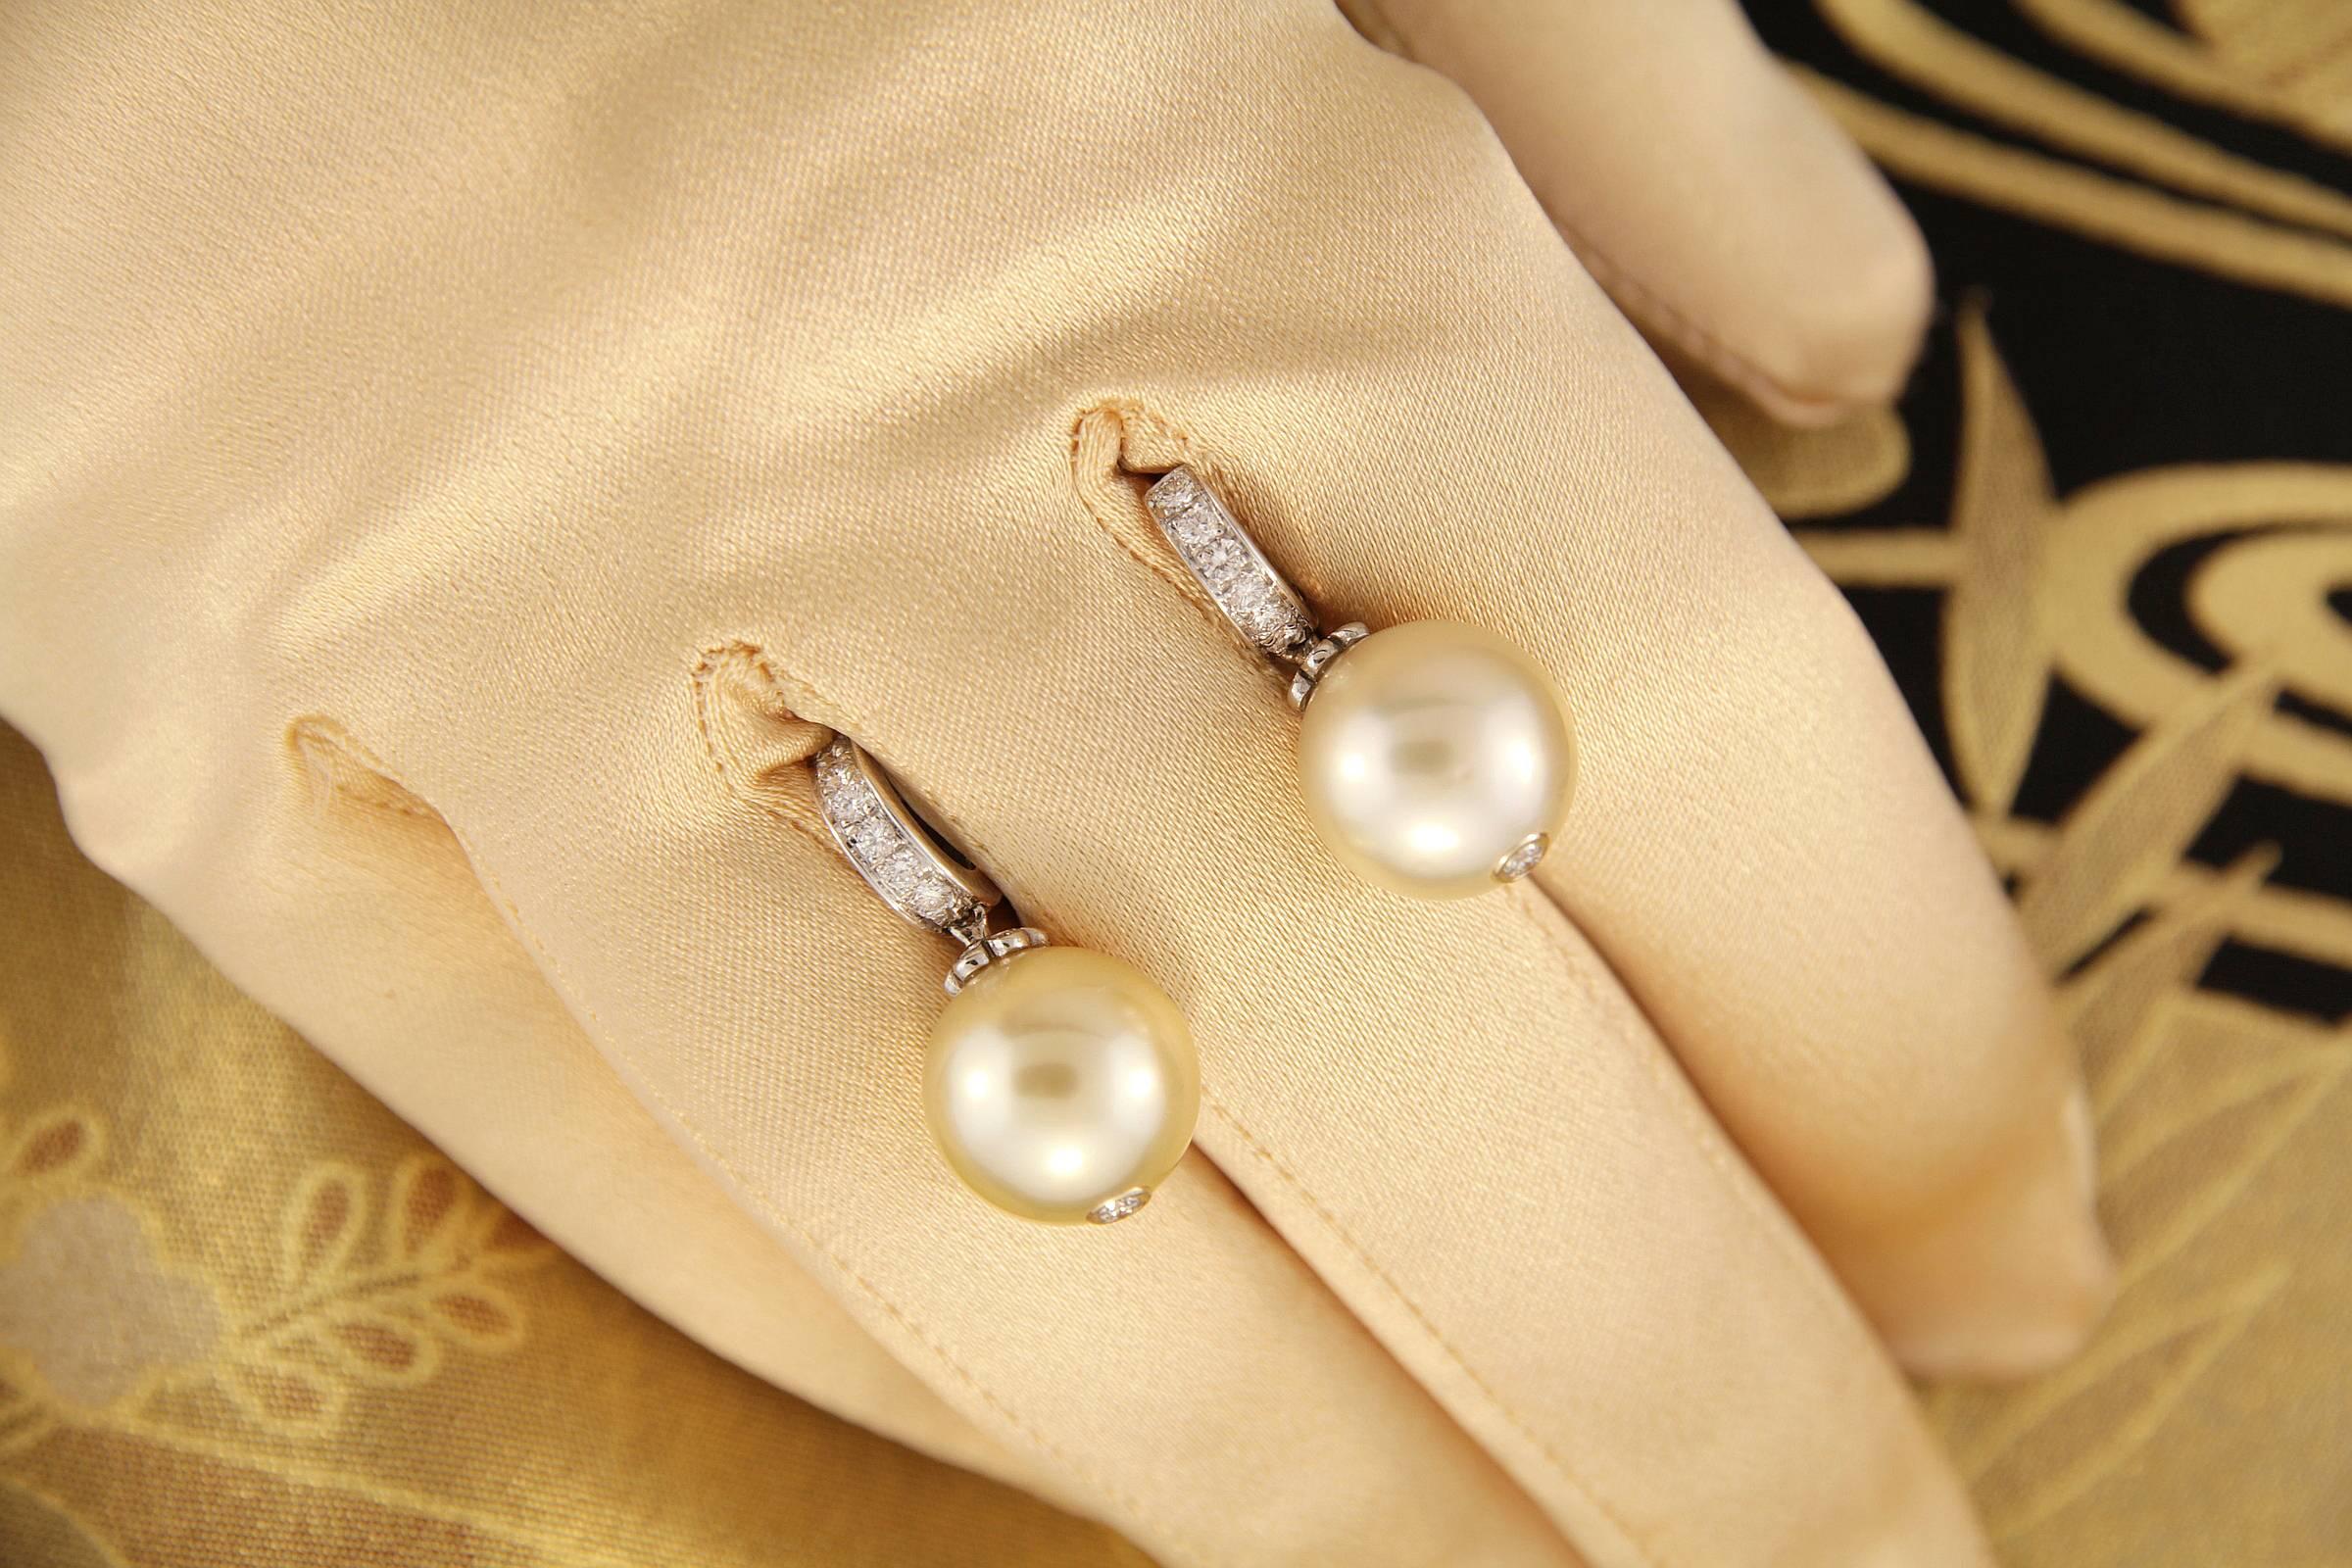 The two 12mm diameter golden South Sea pearls originate from the waters of Northwestern Australia. They display fine quality nacre and their natural color and luster have not been enhanced in any way.
The pearls are suspended from 2 hoops set with